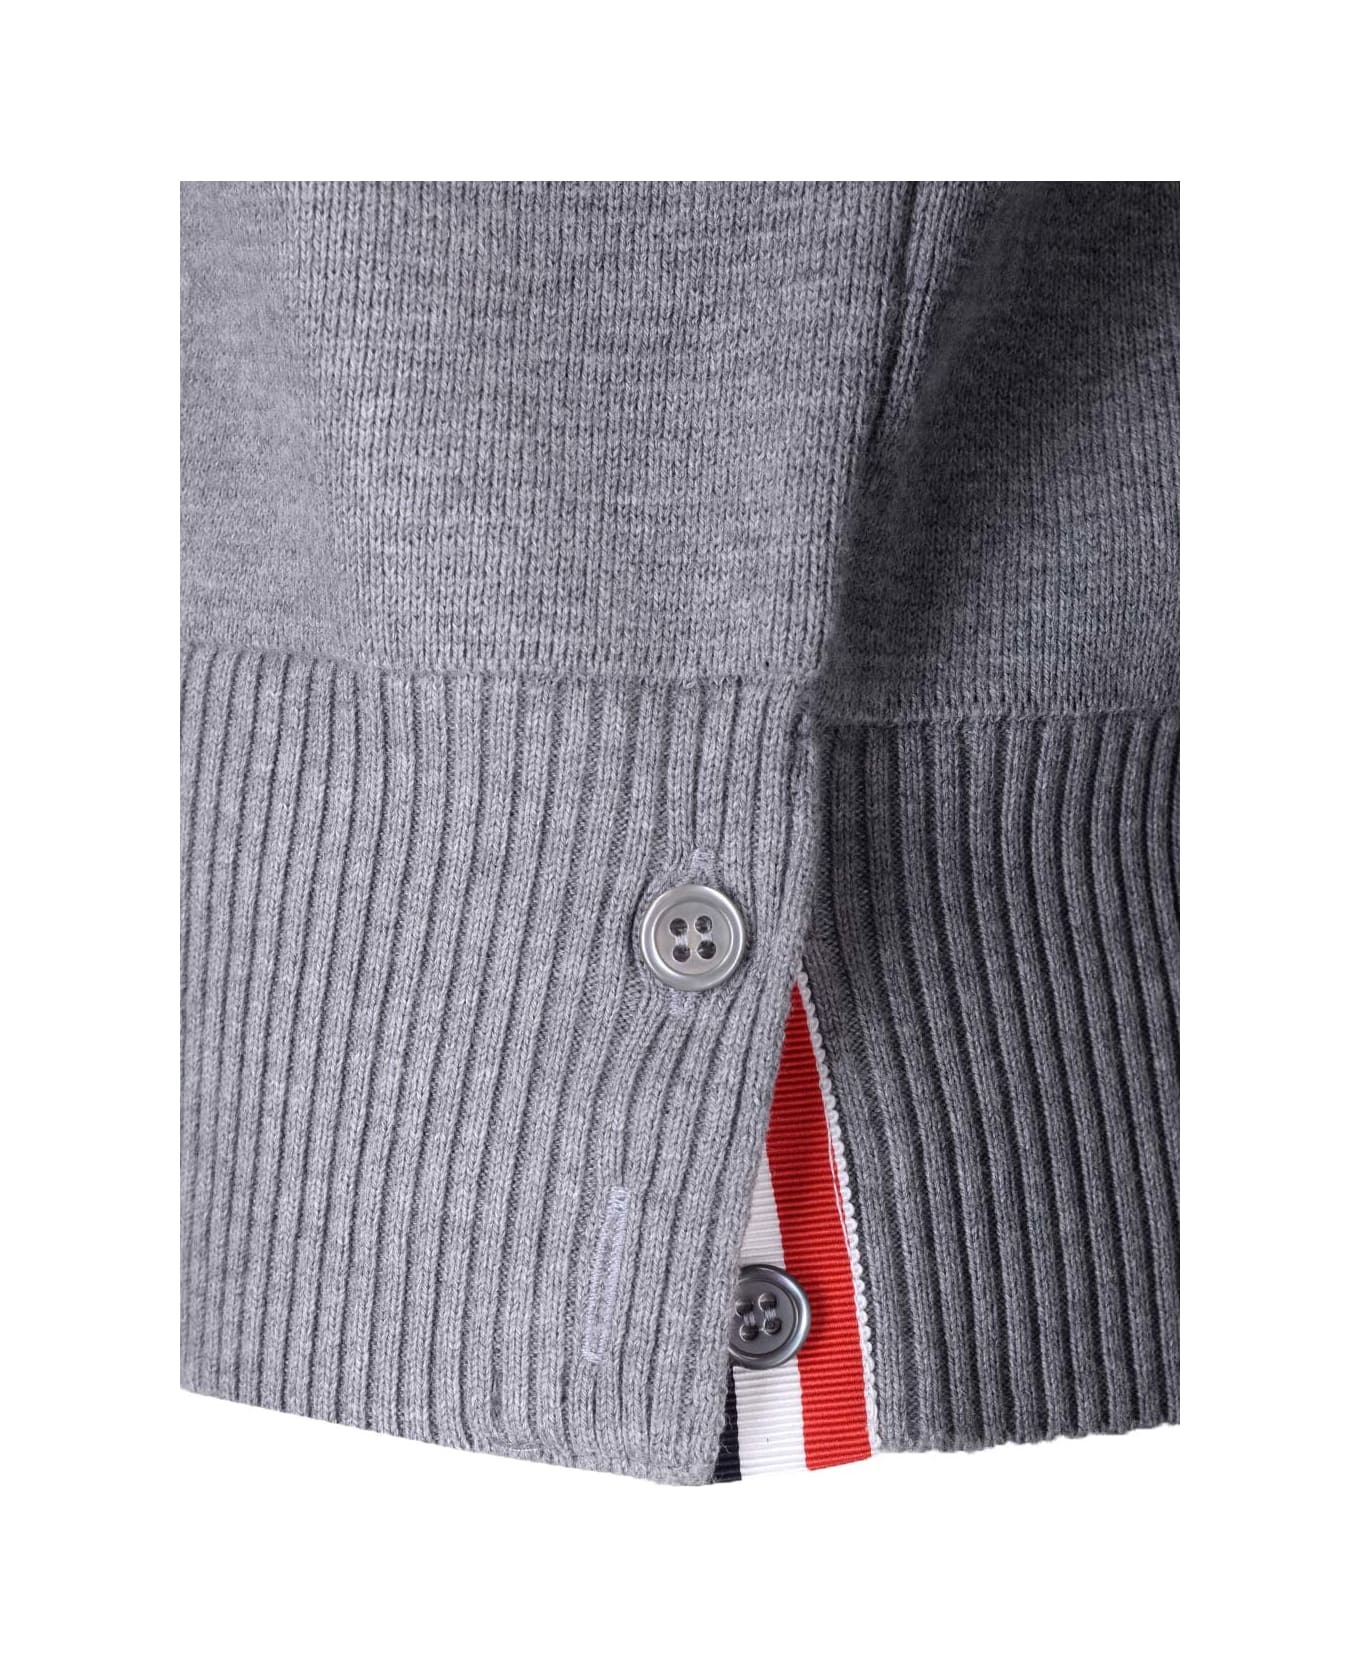 Thom Browne Gray Crewneck Pullover With Stripes - Light grey ニットウェア